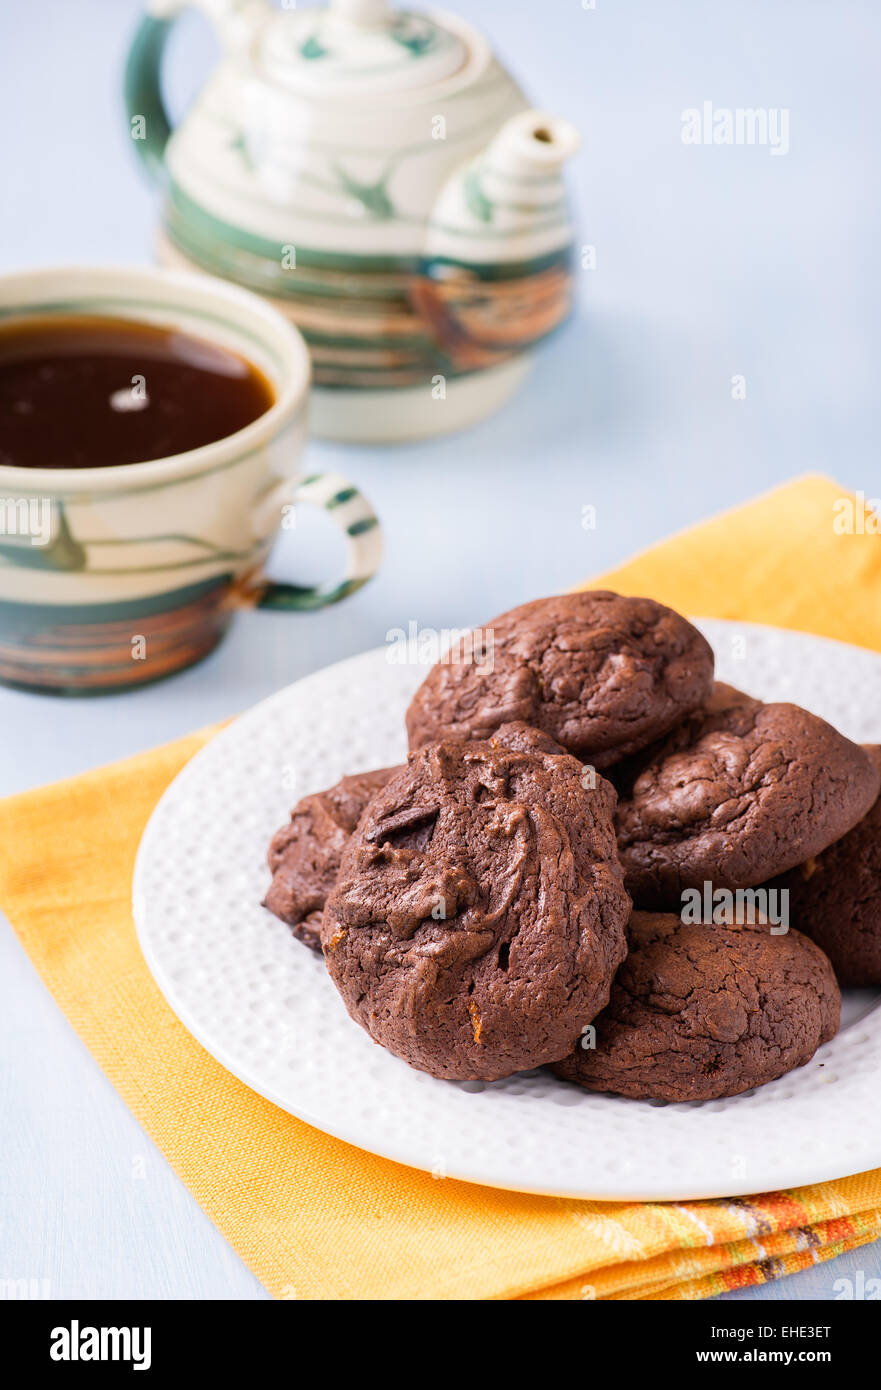 Homemade chocolate cookies on white plate, selective focus Stock Photo